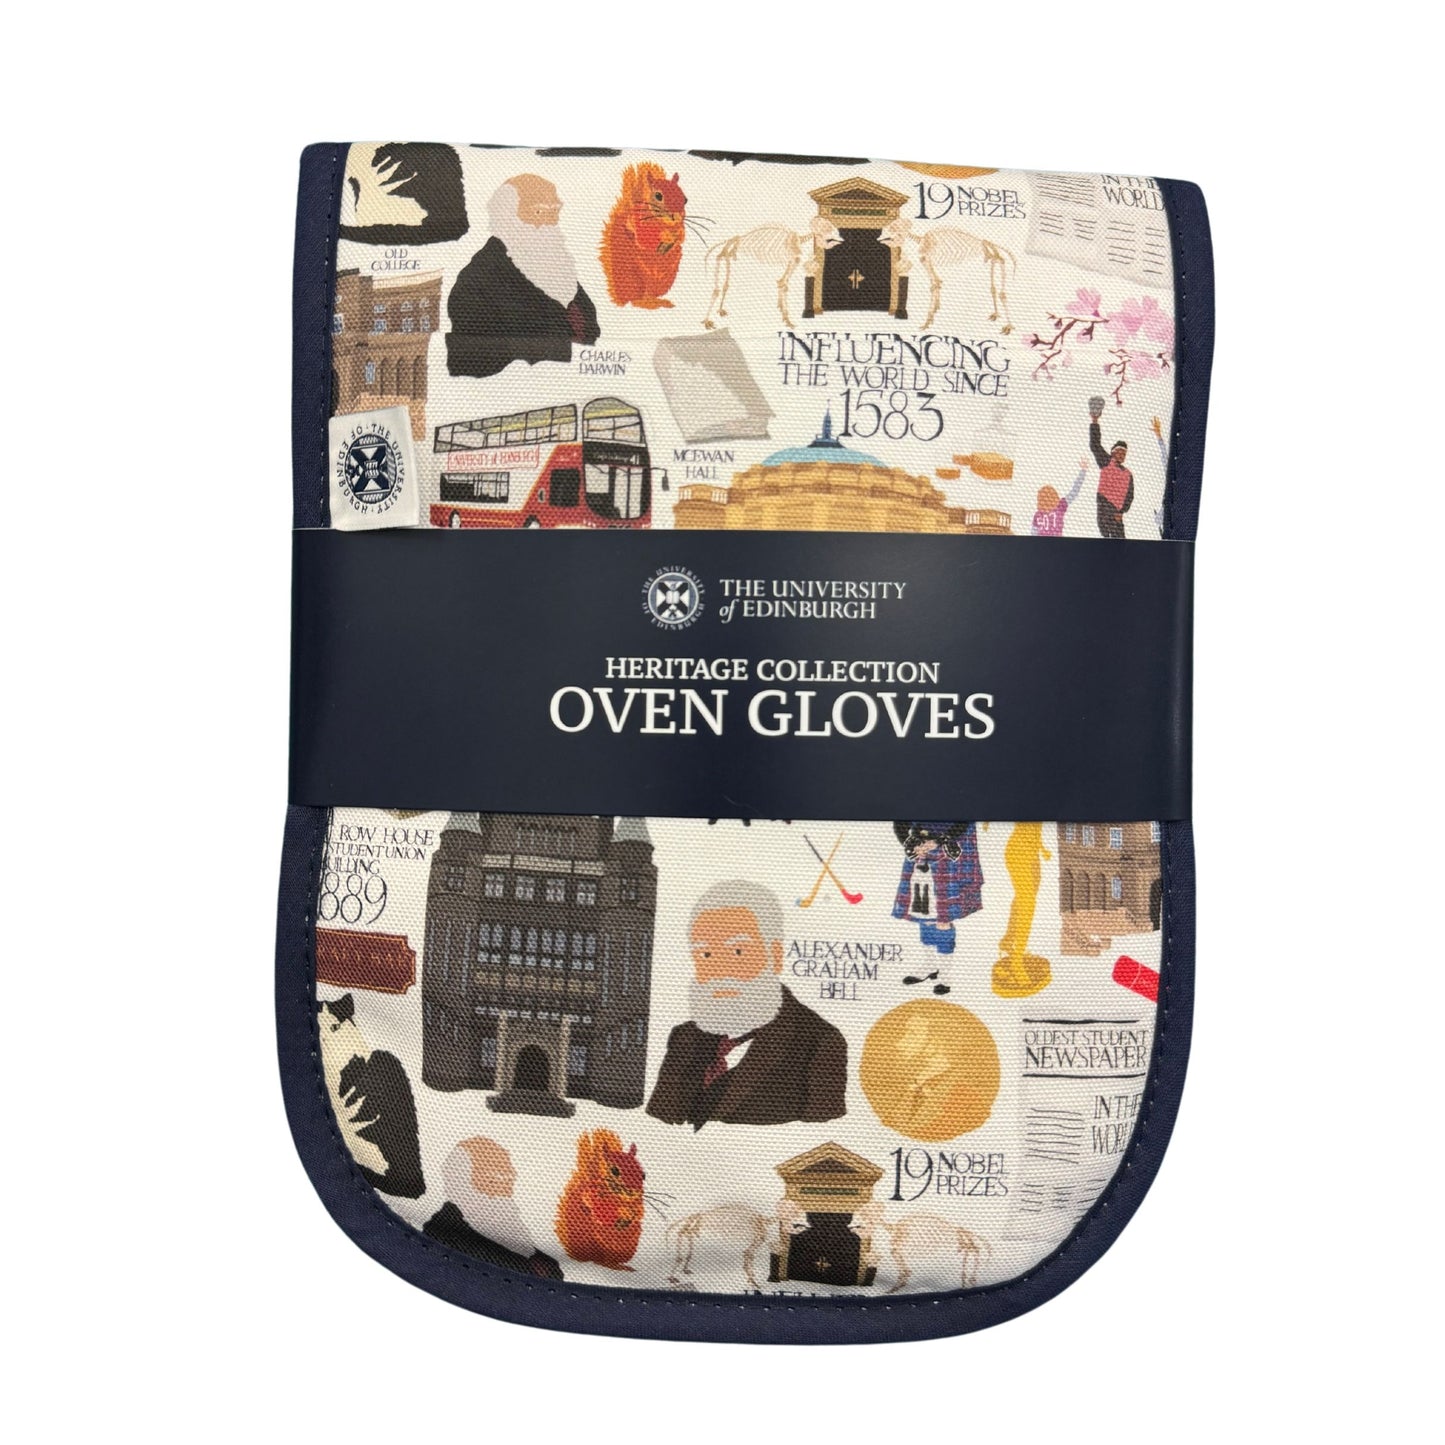 Heritage Collection Oven Gloves